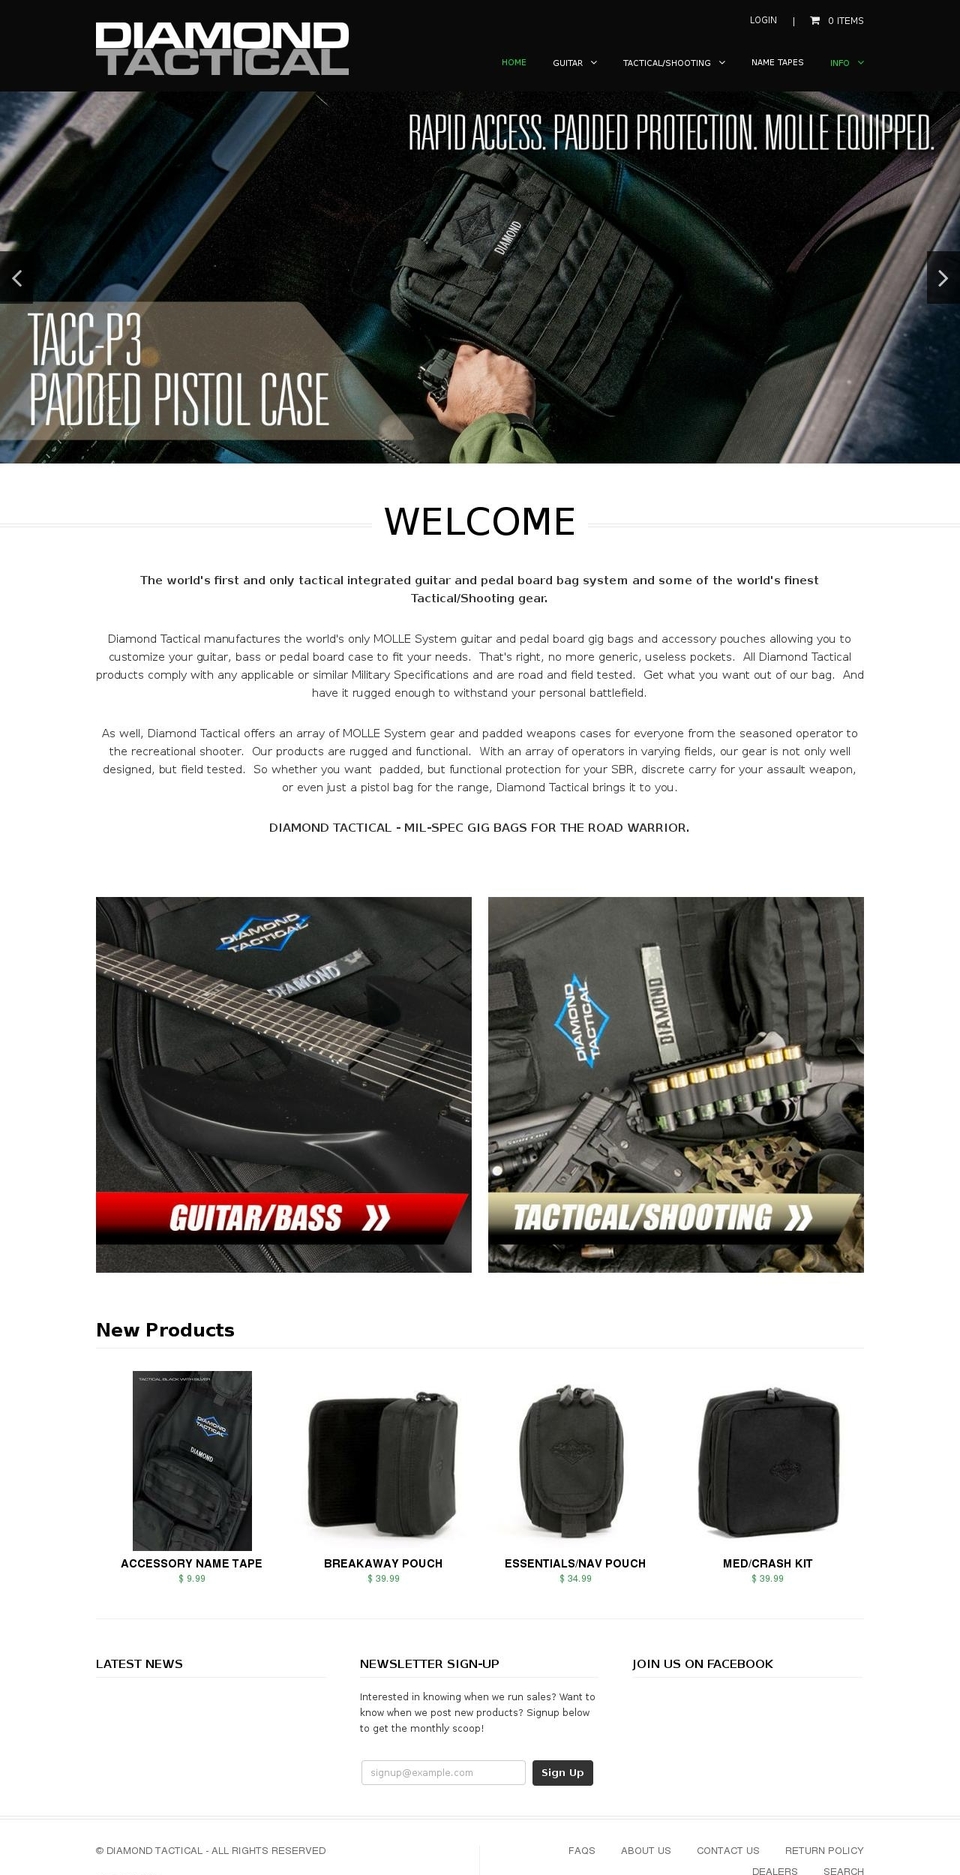 limitless Shopify theme site example diamondtactical.net